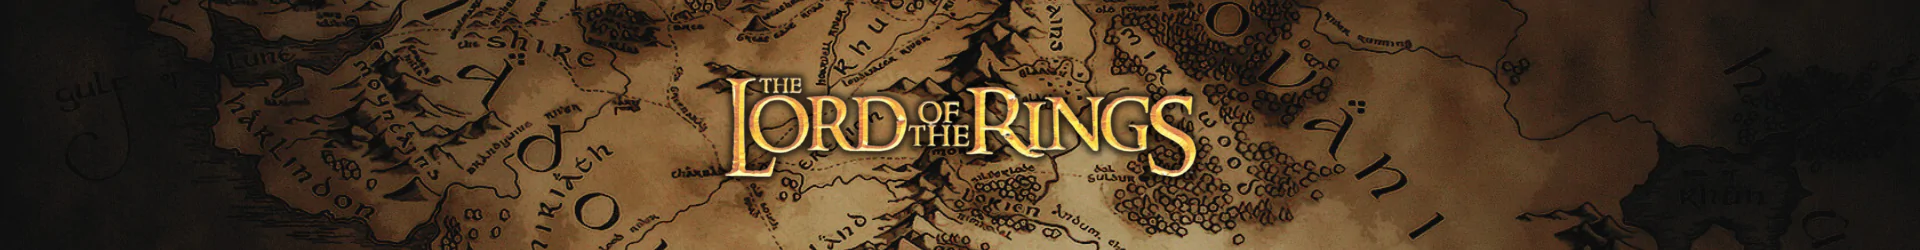 Lord of the Rings Produkte banner